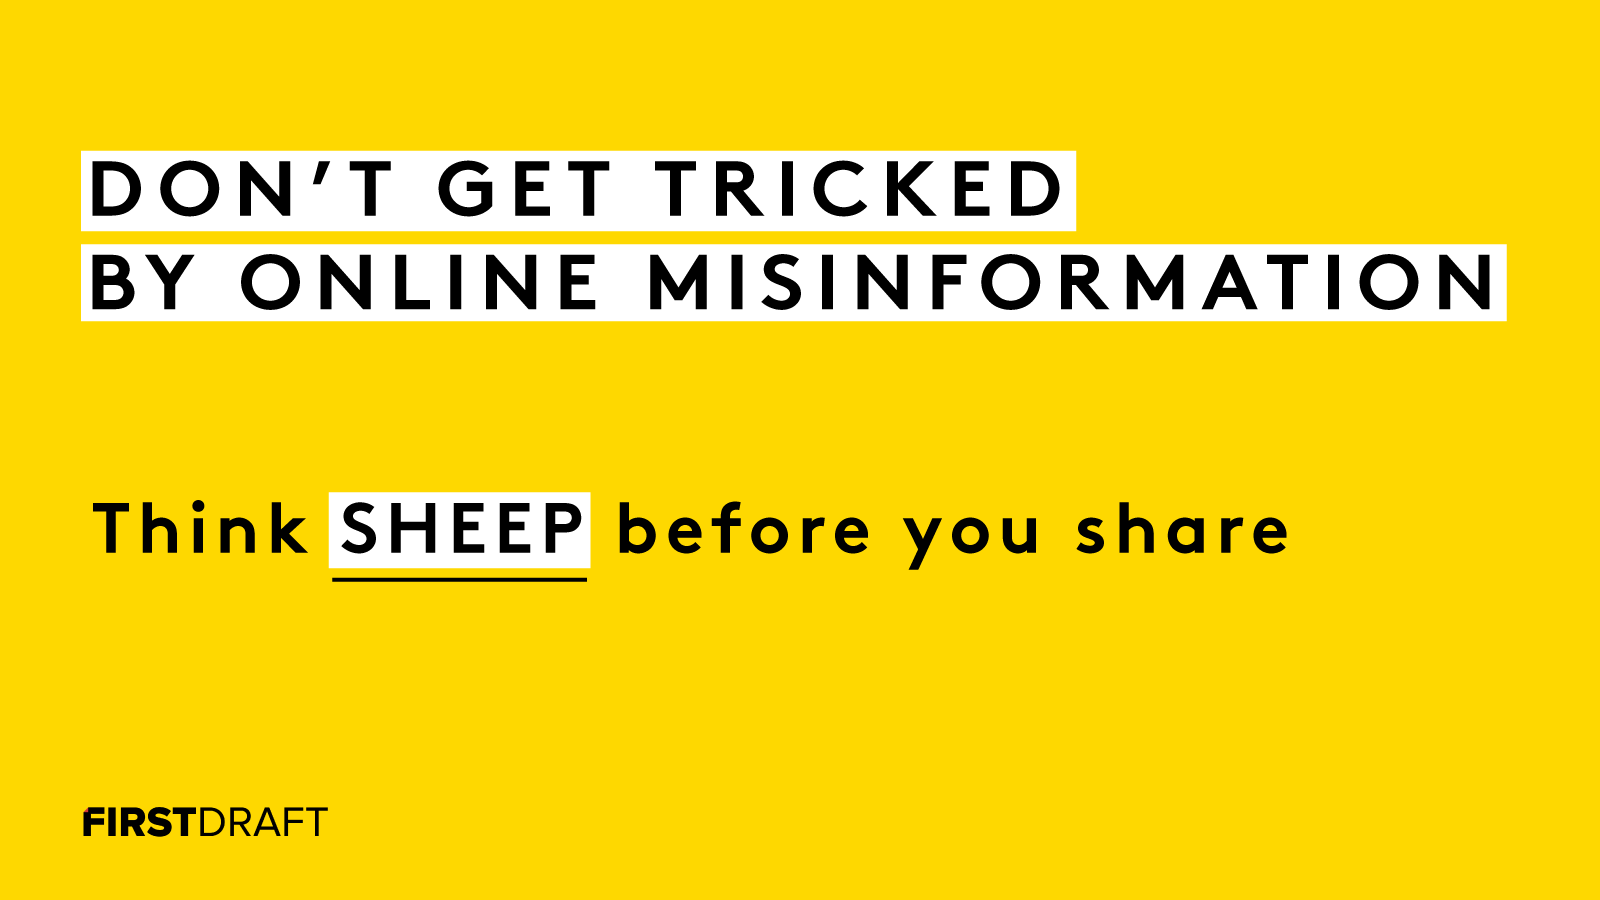 Think 'Sheep' before you share to avoid getting tricked by online misinformation